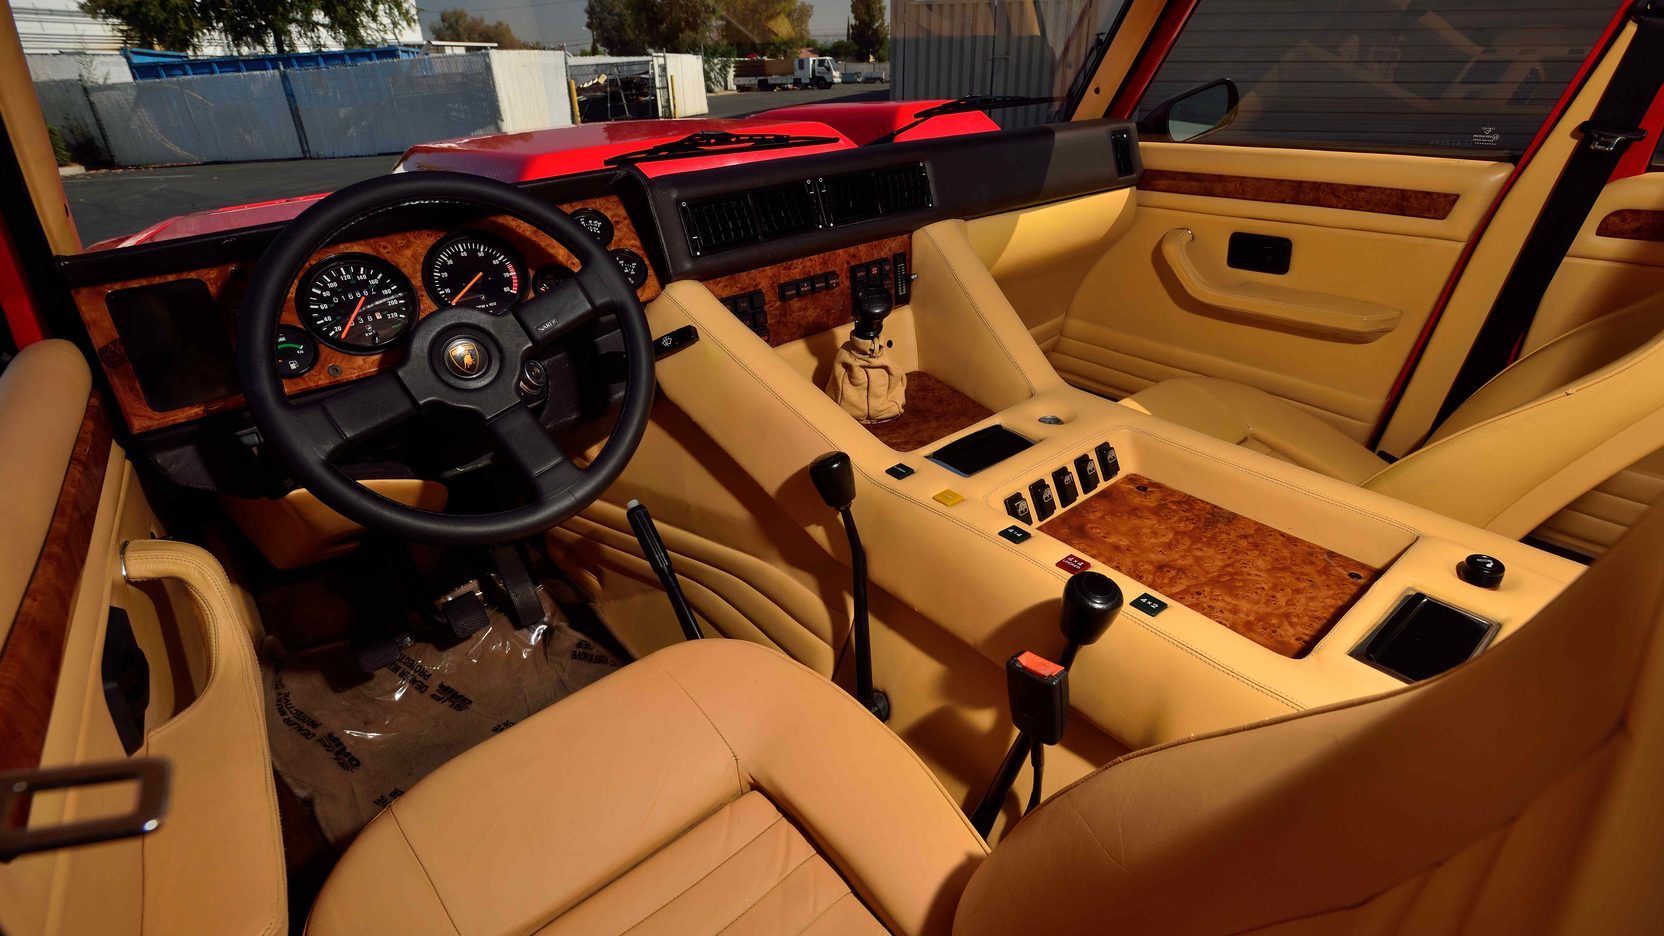 A parked 1990 Lambo LM002